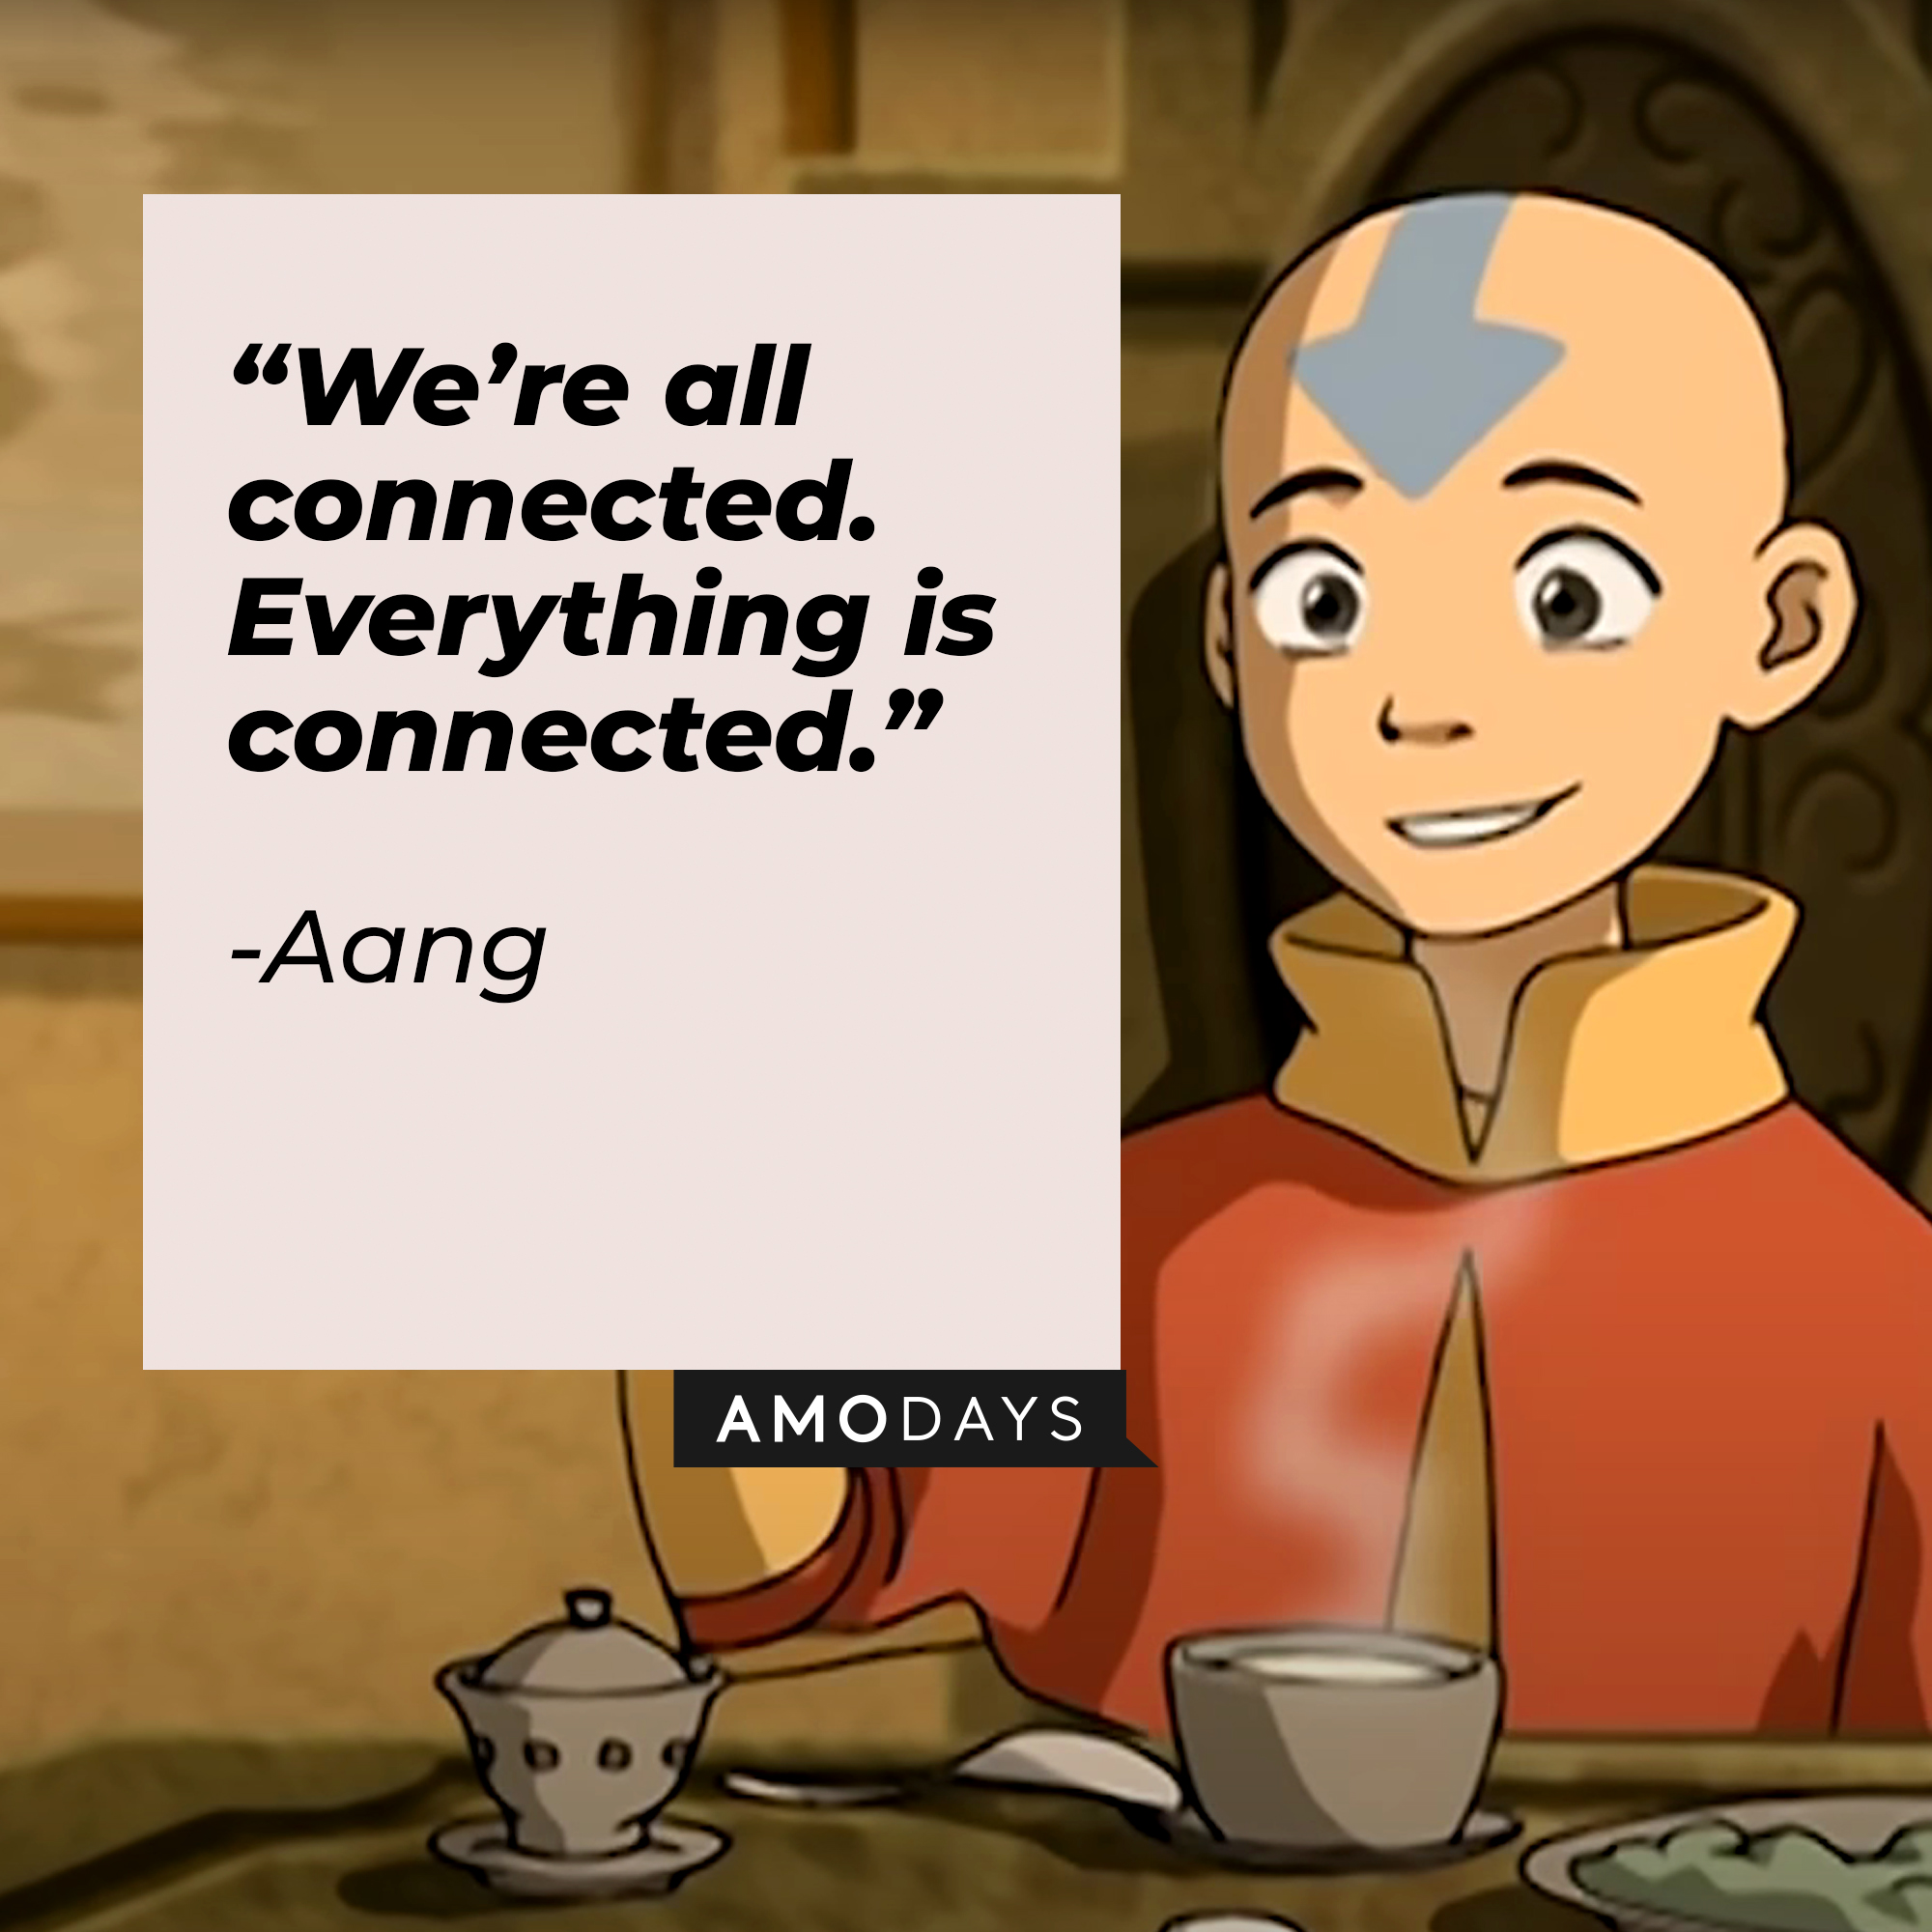 Aang’s quote: “We’re all connected. Everything is connected.” | Source: Youtube.com/TeamAvatar